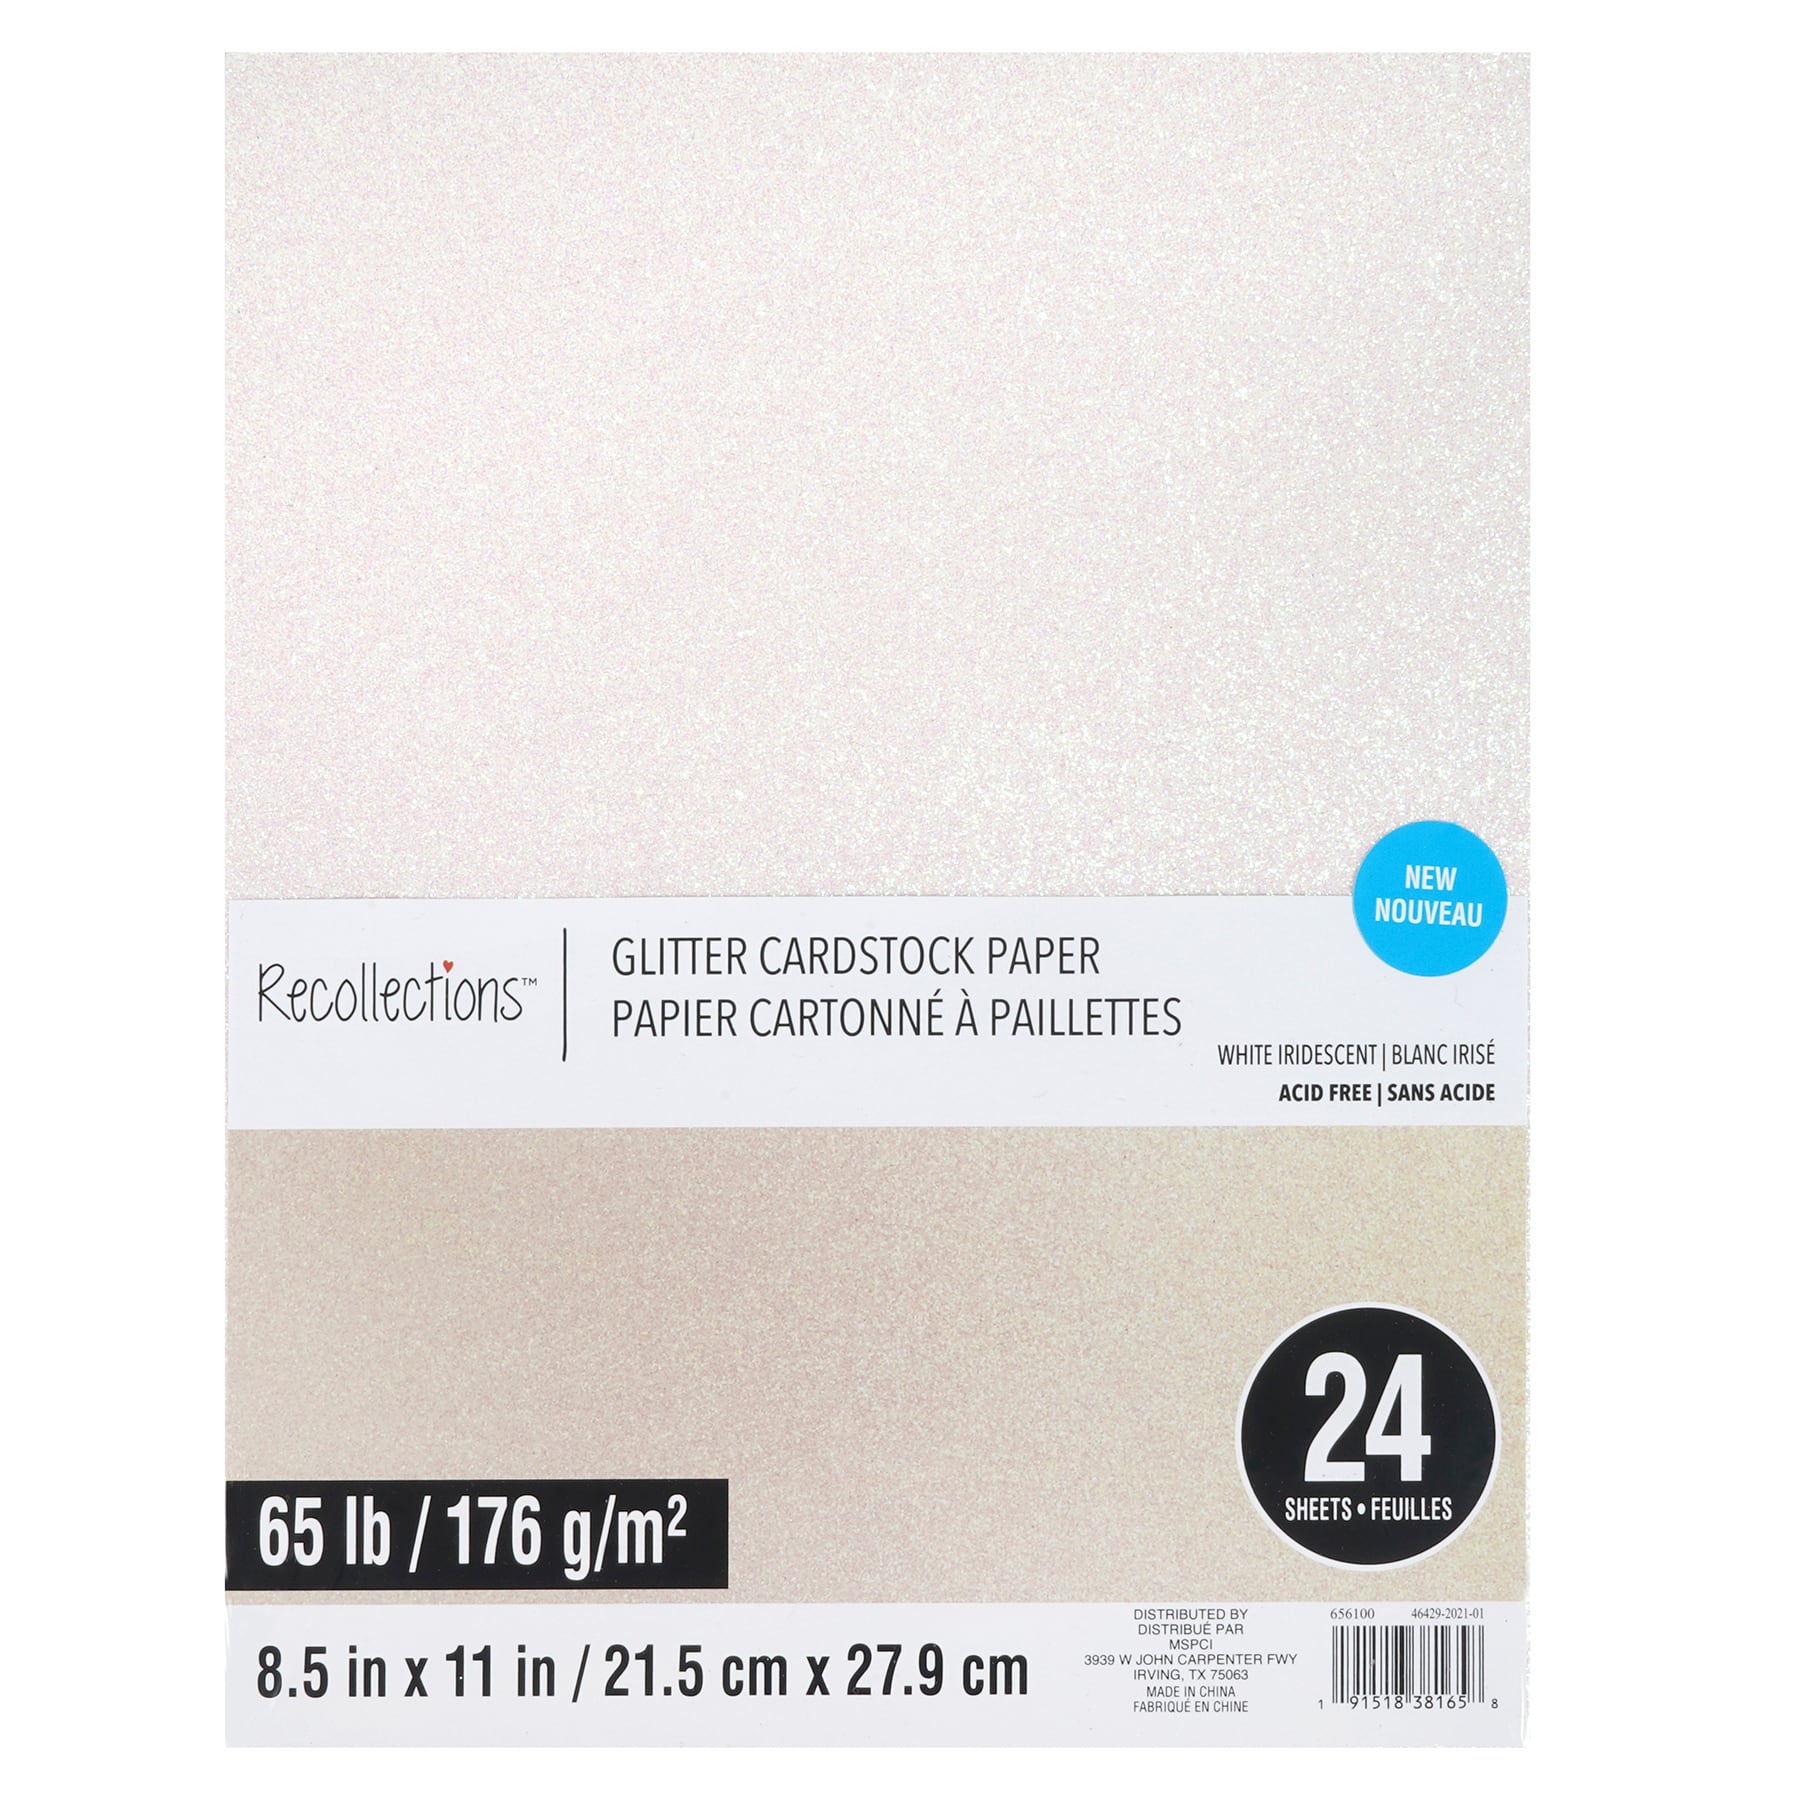 Rose Gold Glitter Cardstock Paper by Recollections™, 8.5 x 11, Michaels